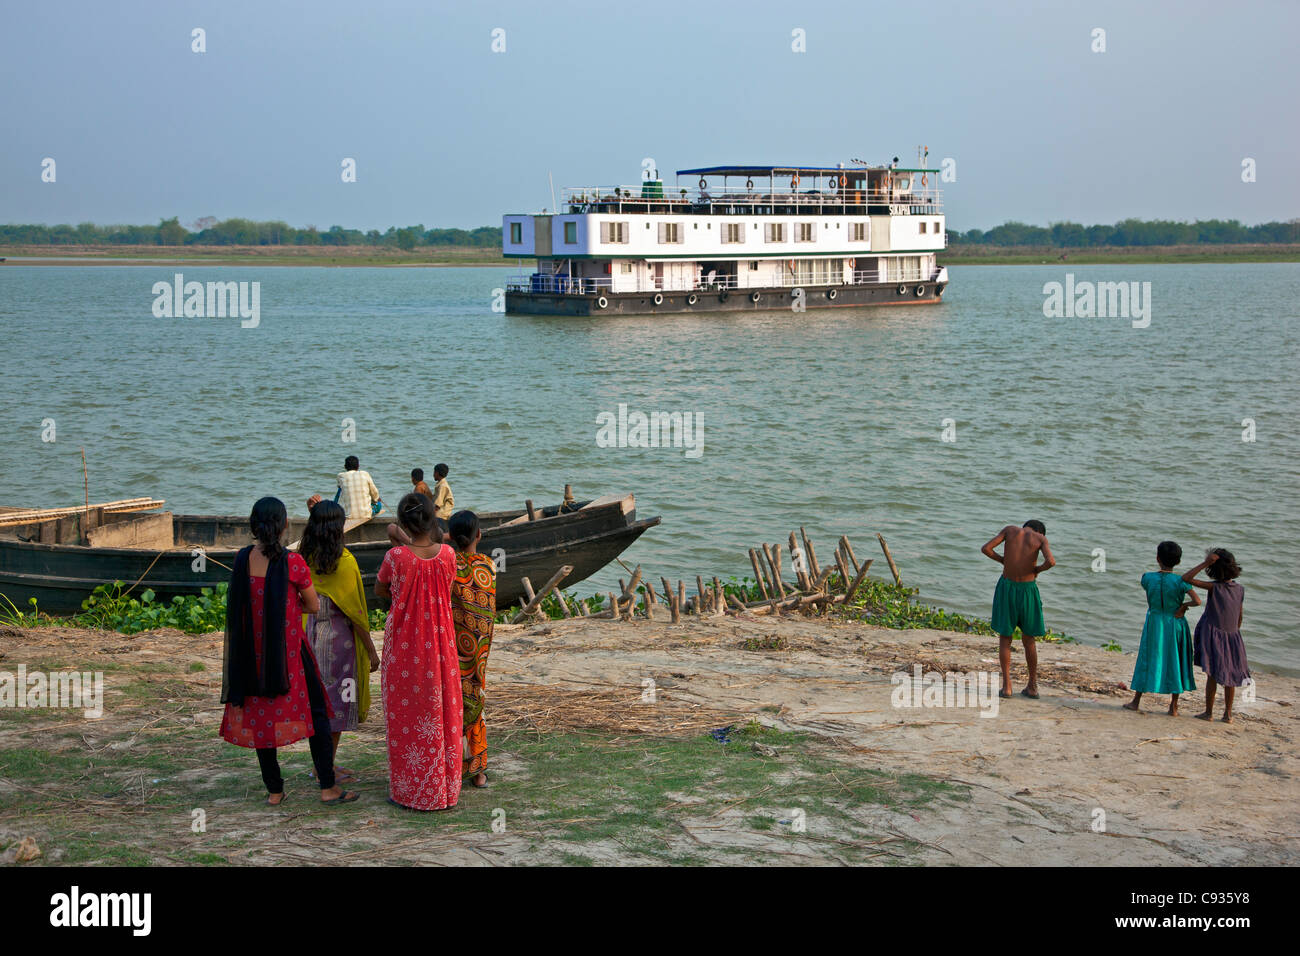 Built in 2006, RV Sukapha, a 12-cabin river boat takes passengers in comfort on cruises up the Hooghly River. Stock Photo